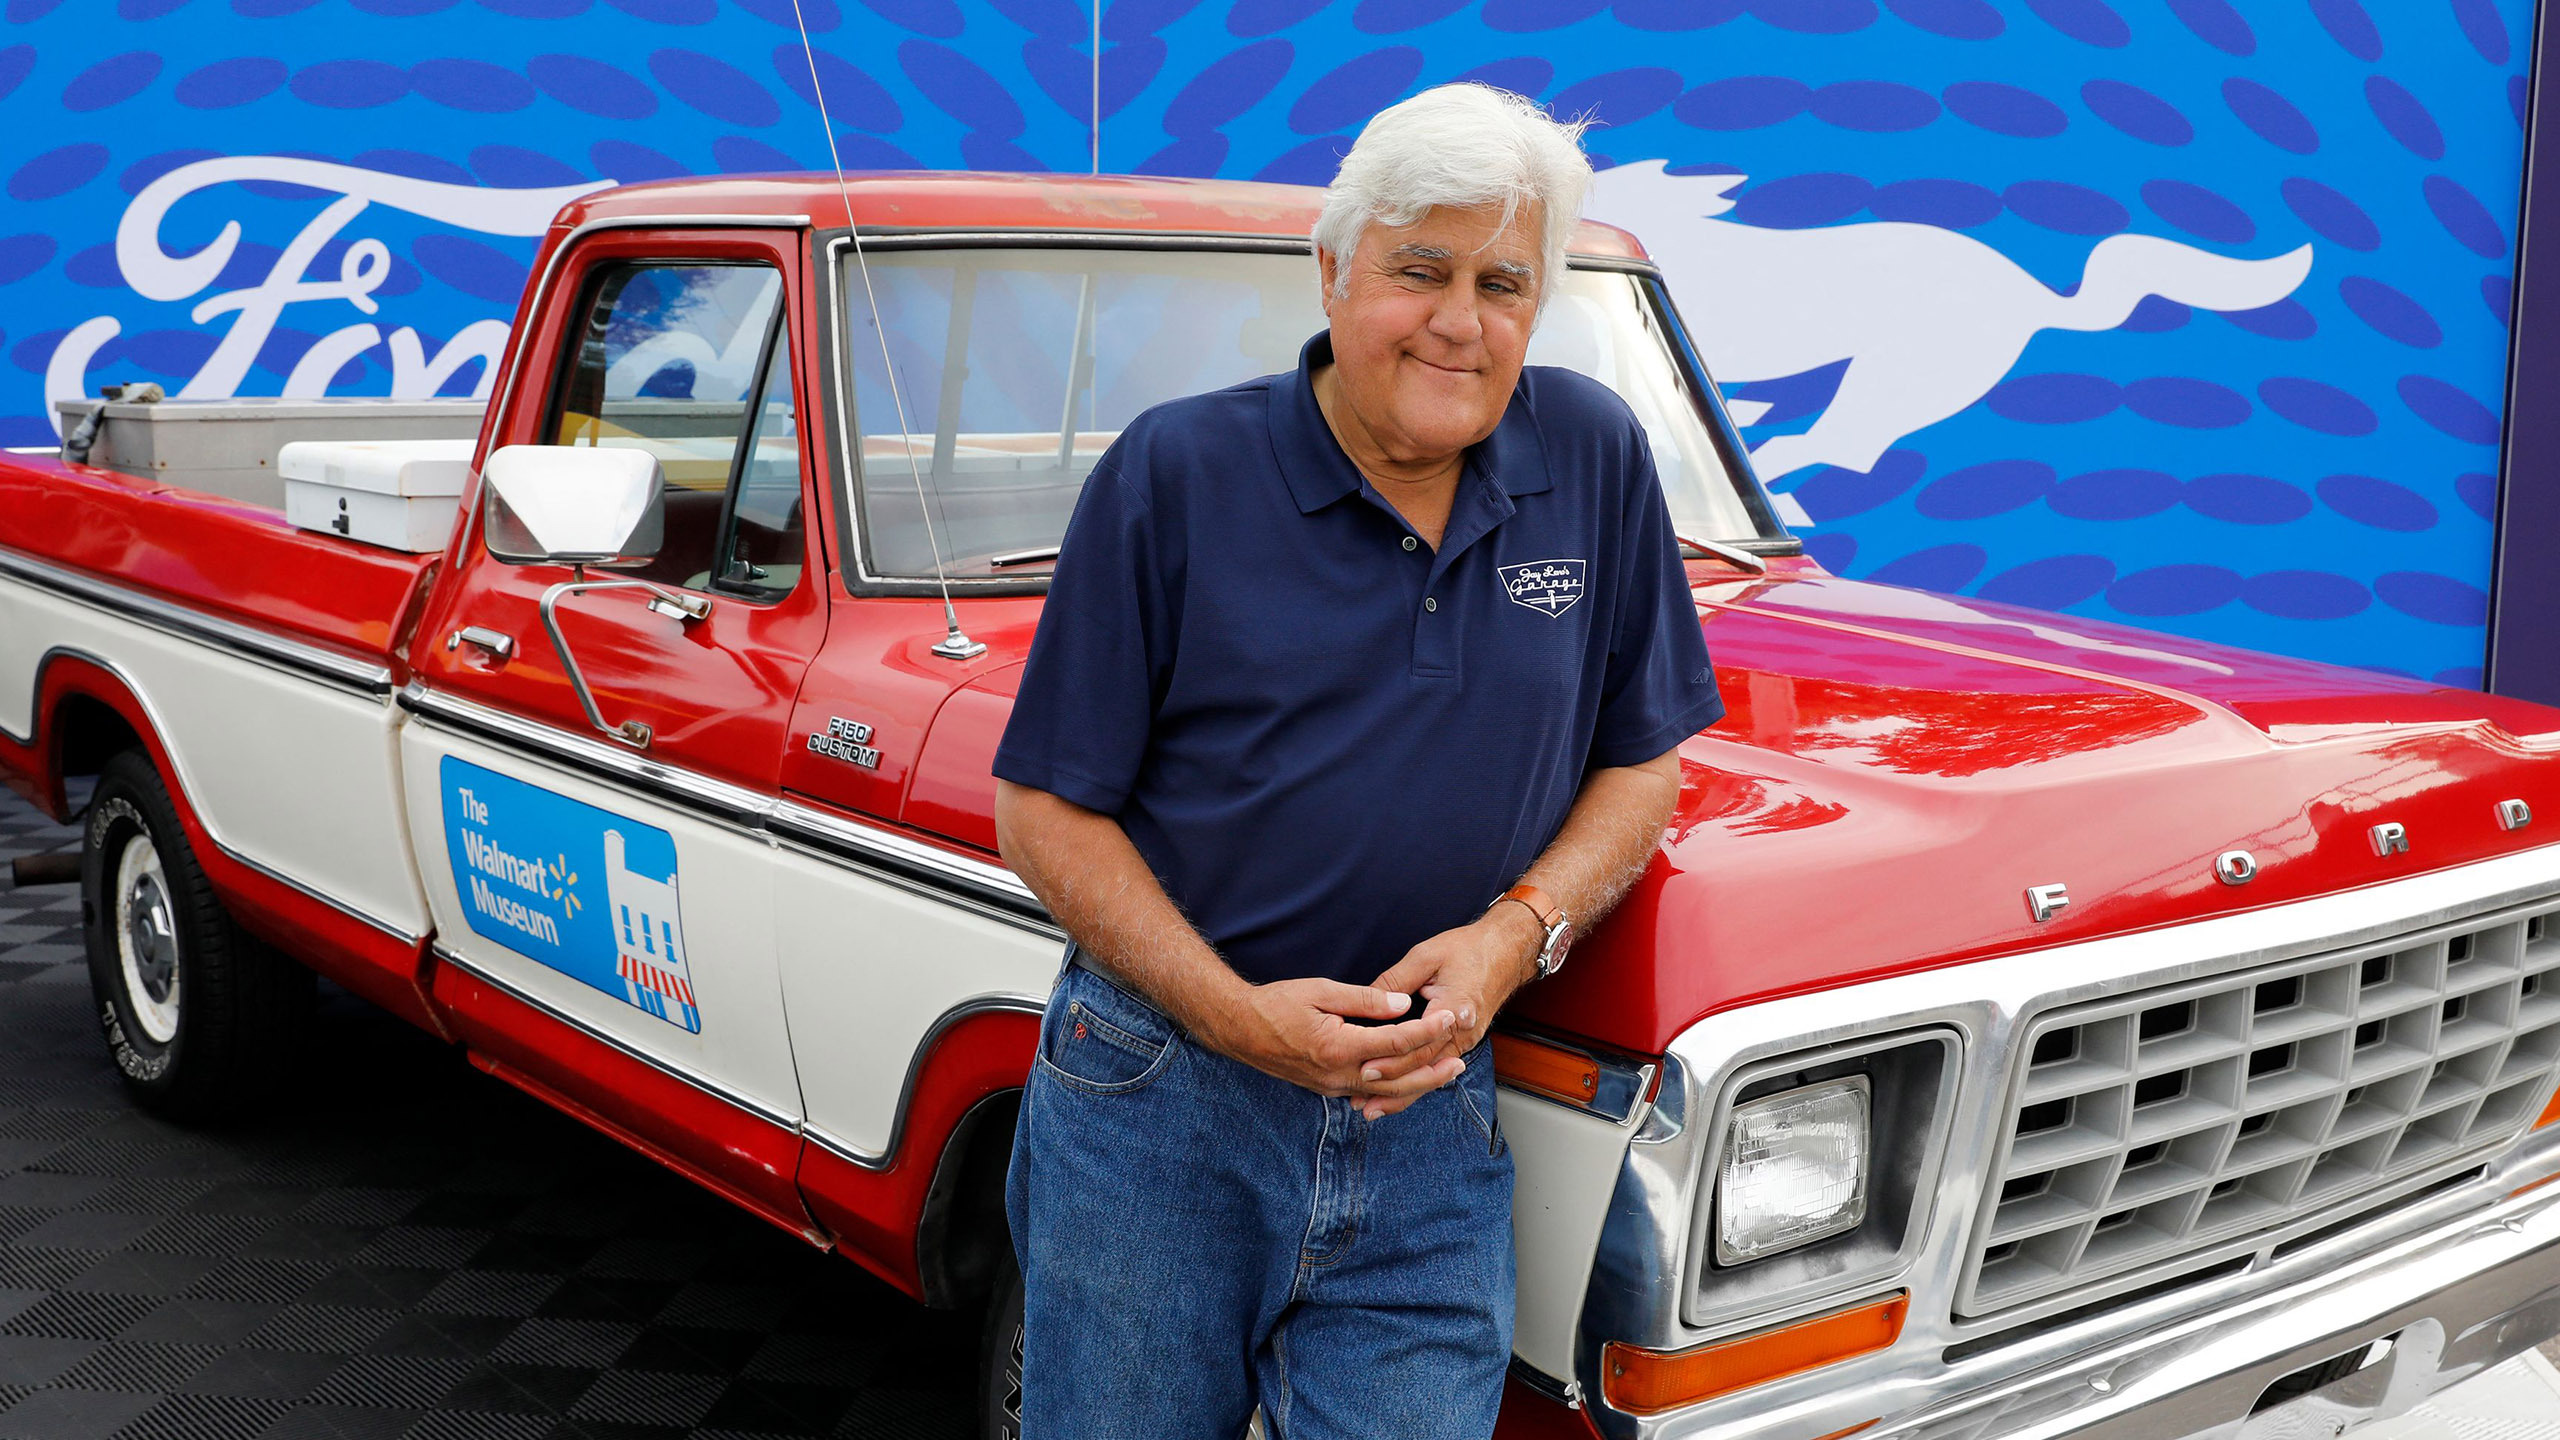 Jay Leno poses in front of a Ford pickup truck